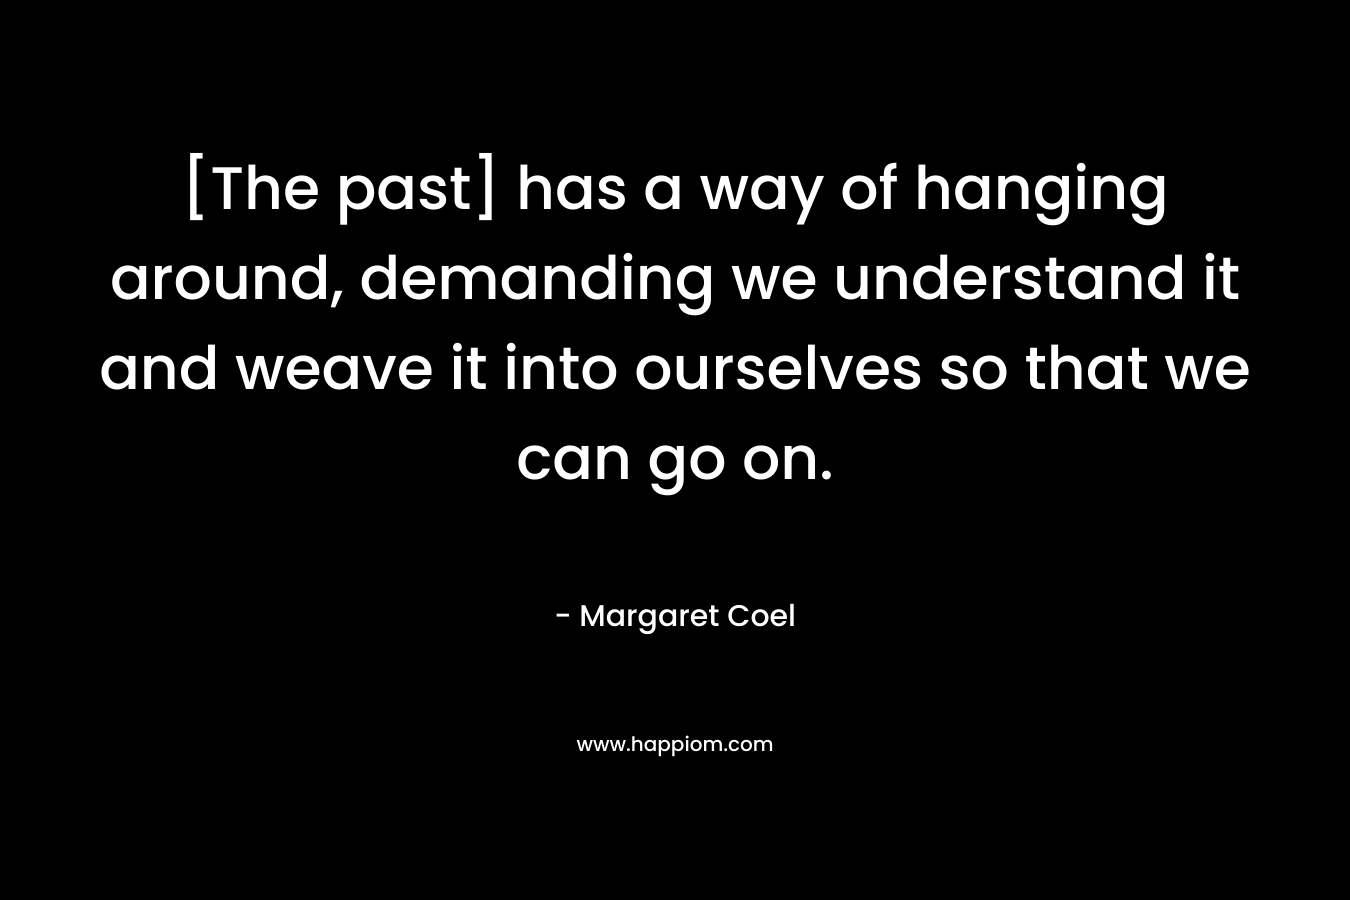 [The past] has a way of hanging around, demanding we understand it and weave it into ourselves so that we can go on. – Margaret Coel